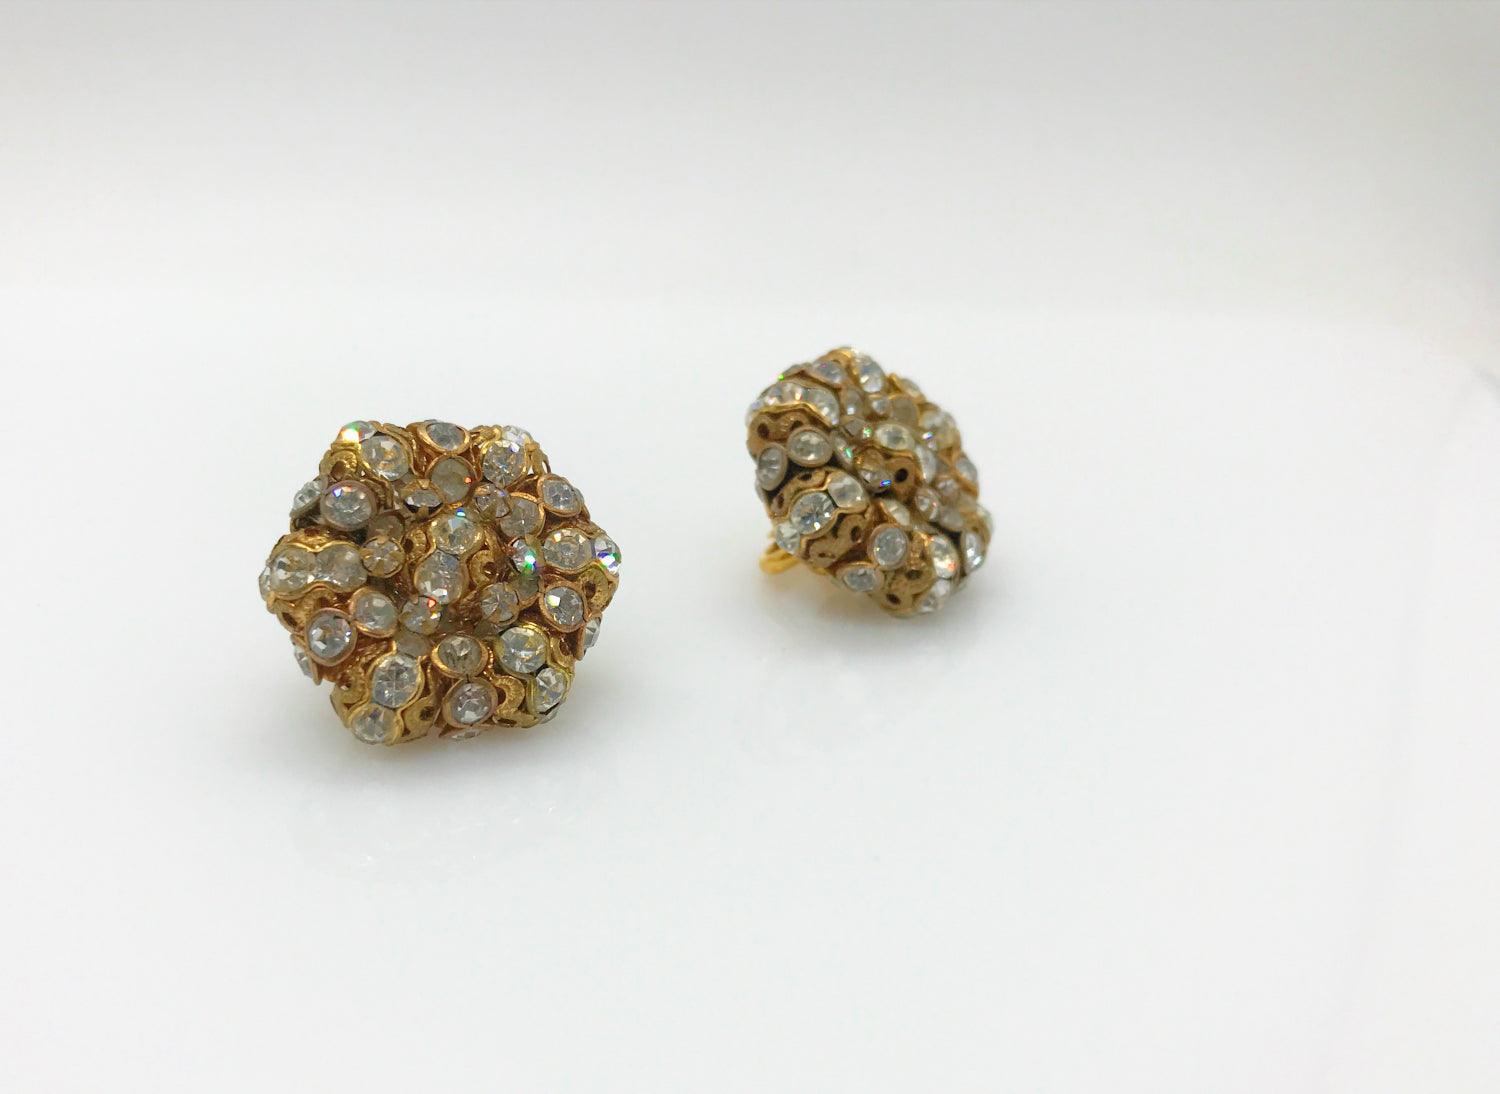 Vintage Vogue Rich Woven Rhinestone Cluster Clip on Earrings - Lamoree’s Vintage